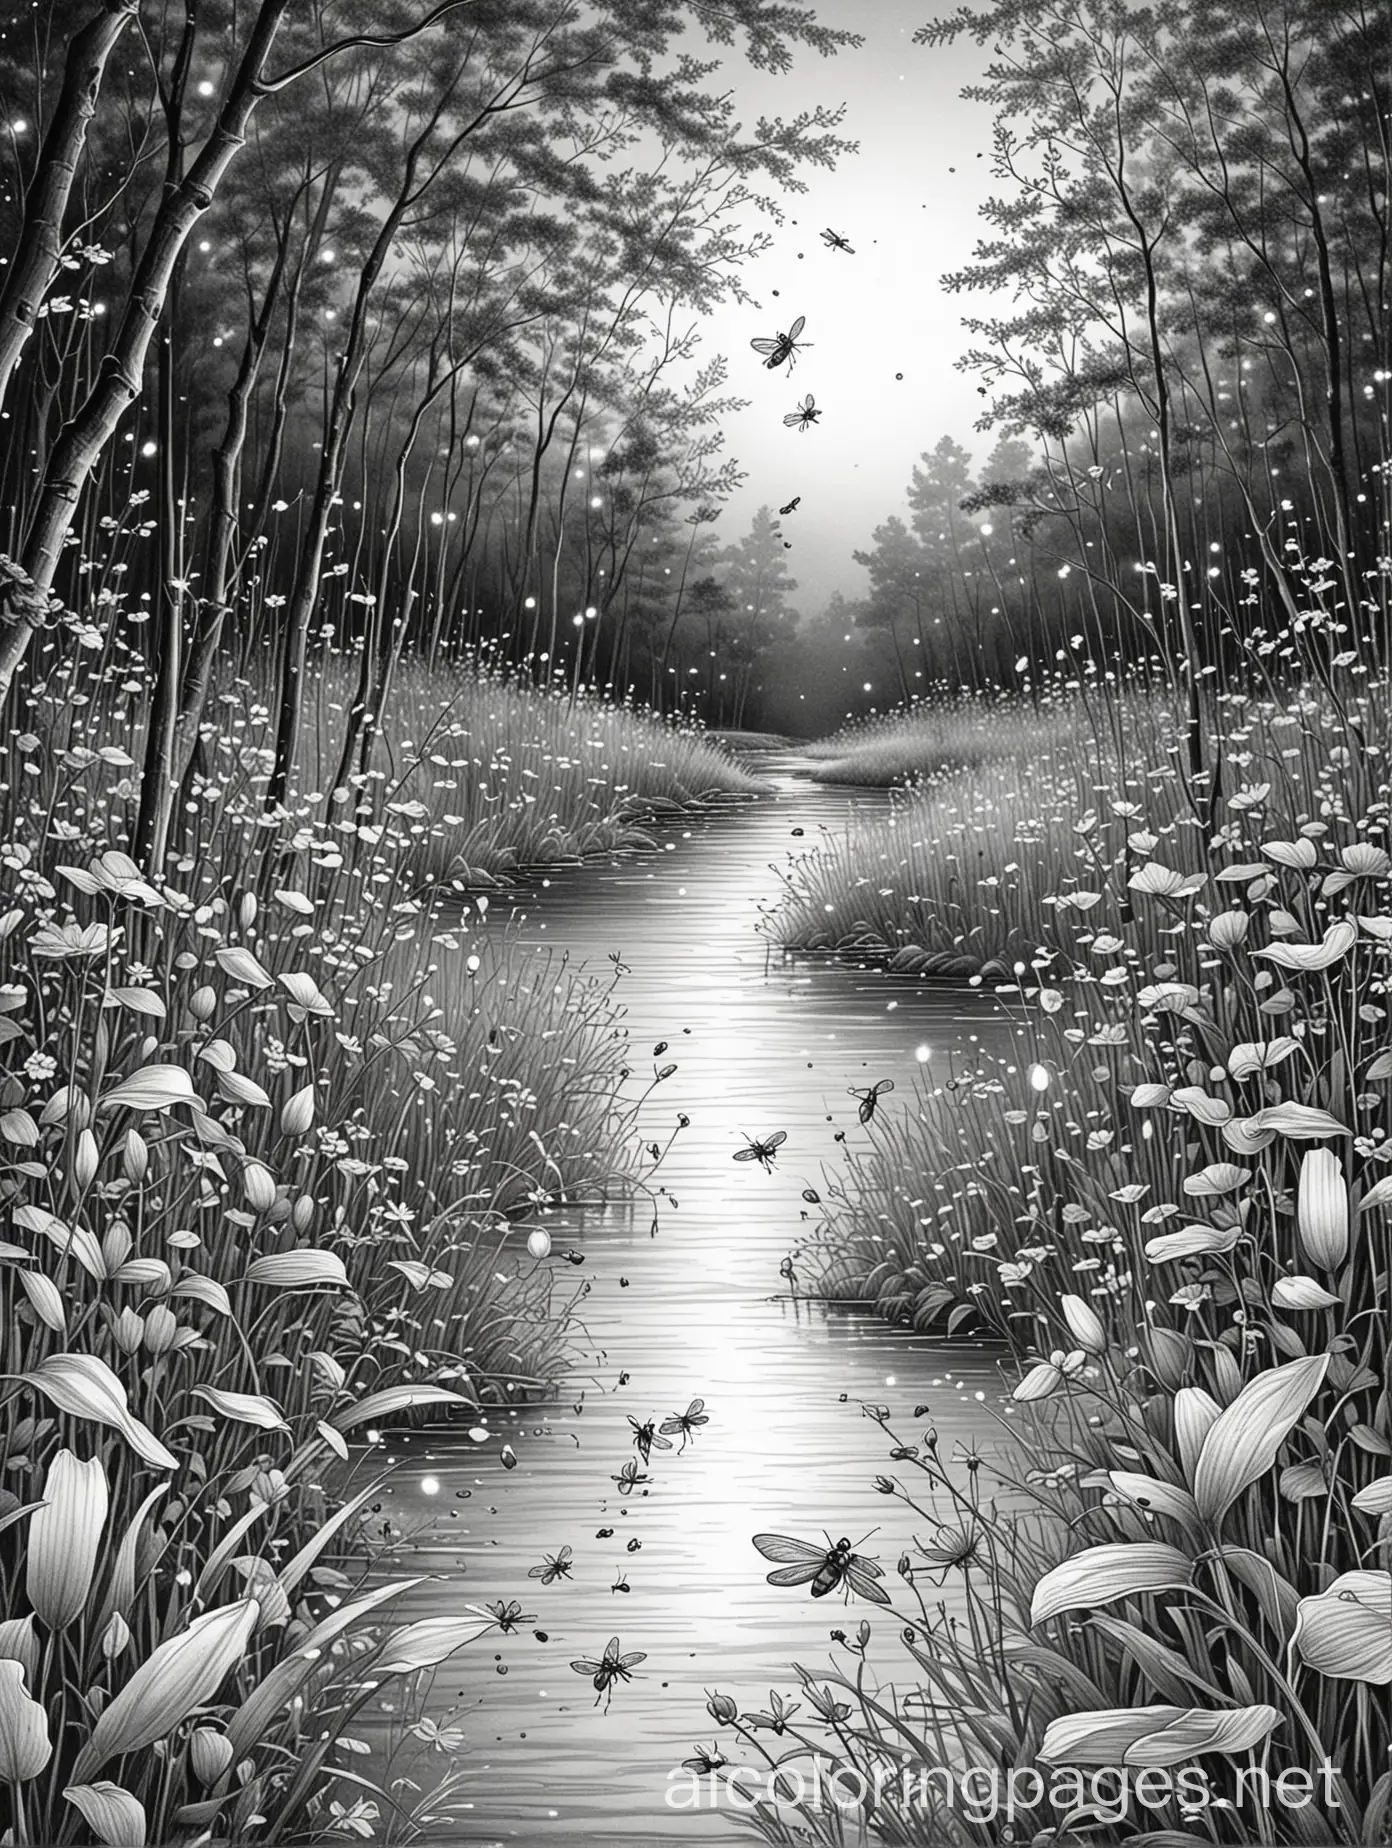 evening fireflies, Coloring Page, black and white, line art, white background, Simplicity, Ample White Space. The background of the coloring page is plain white to make it easy for young children to color within the lines. The outlines of all the subjects are easy to distinguish, making it simple for kids to color without too much difficulty